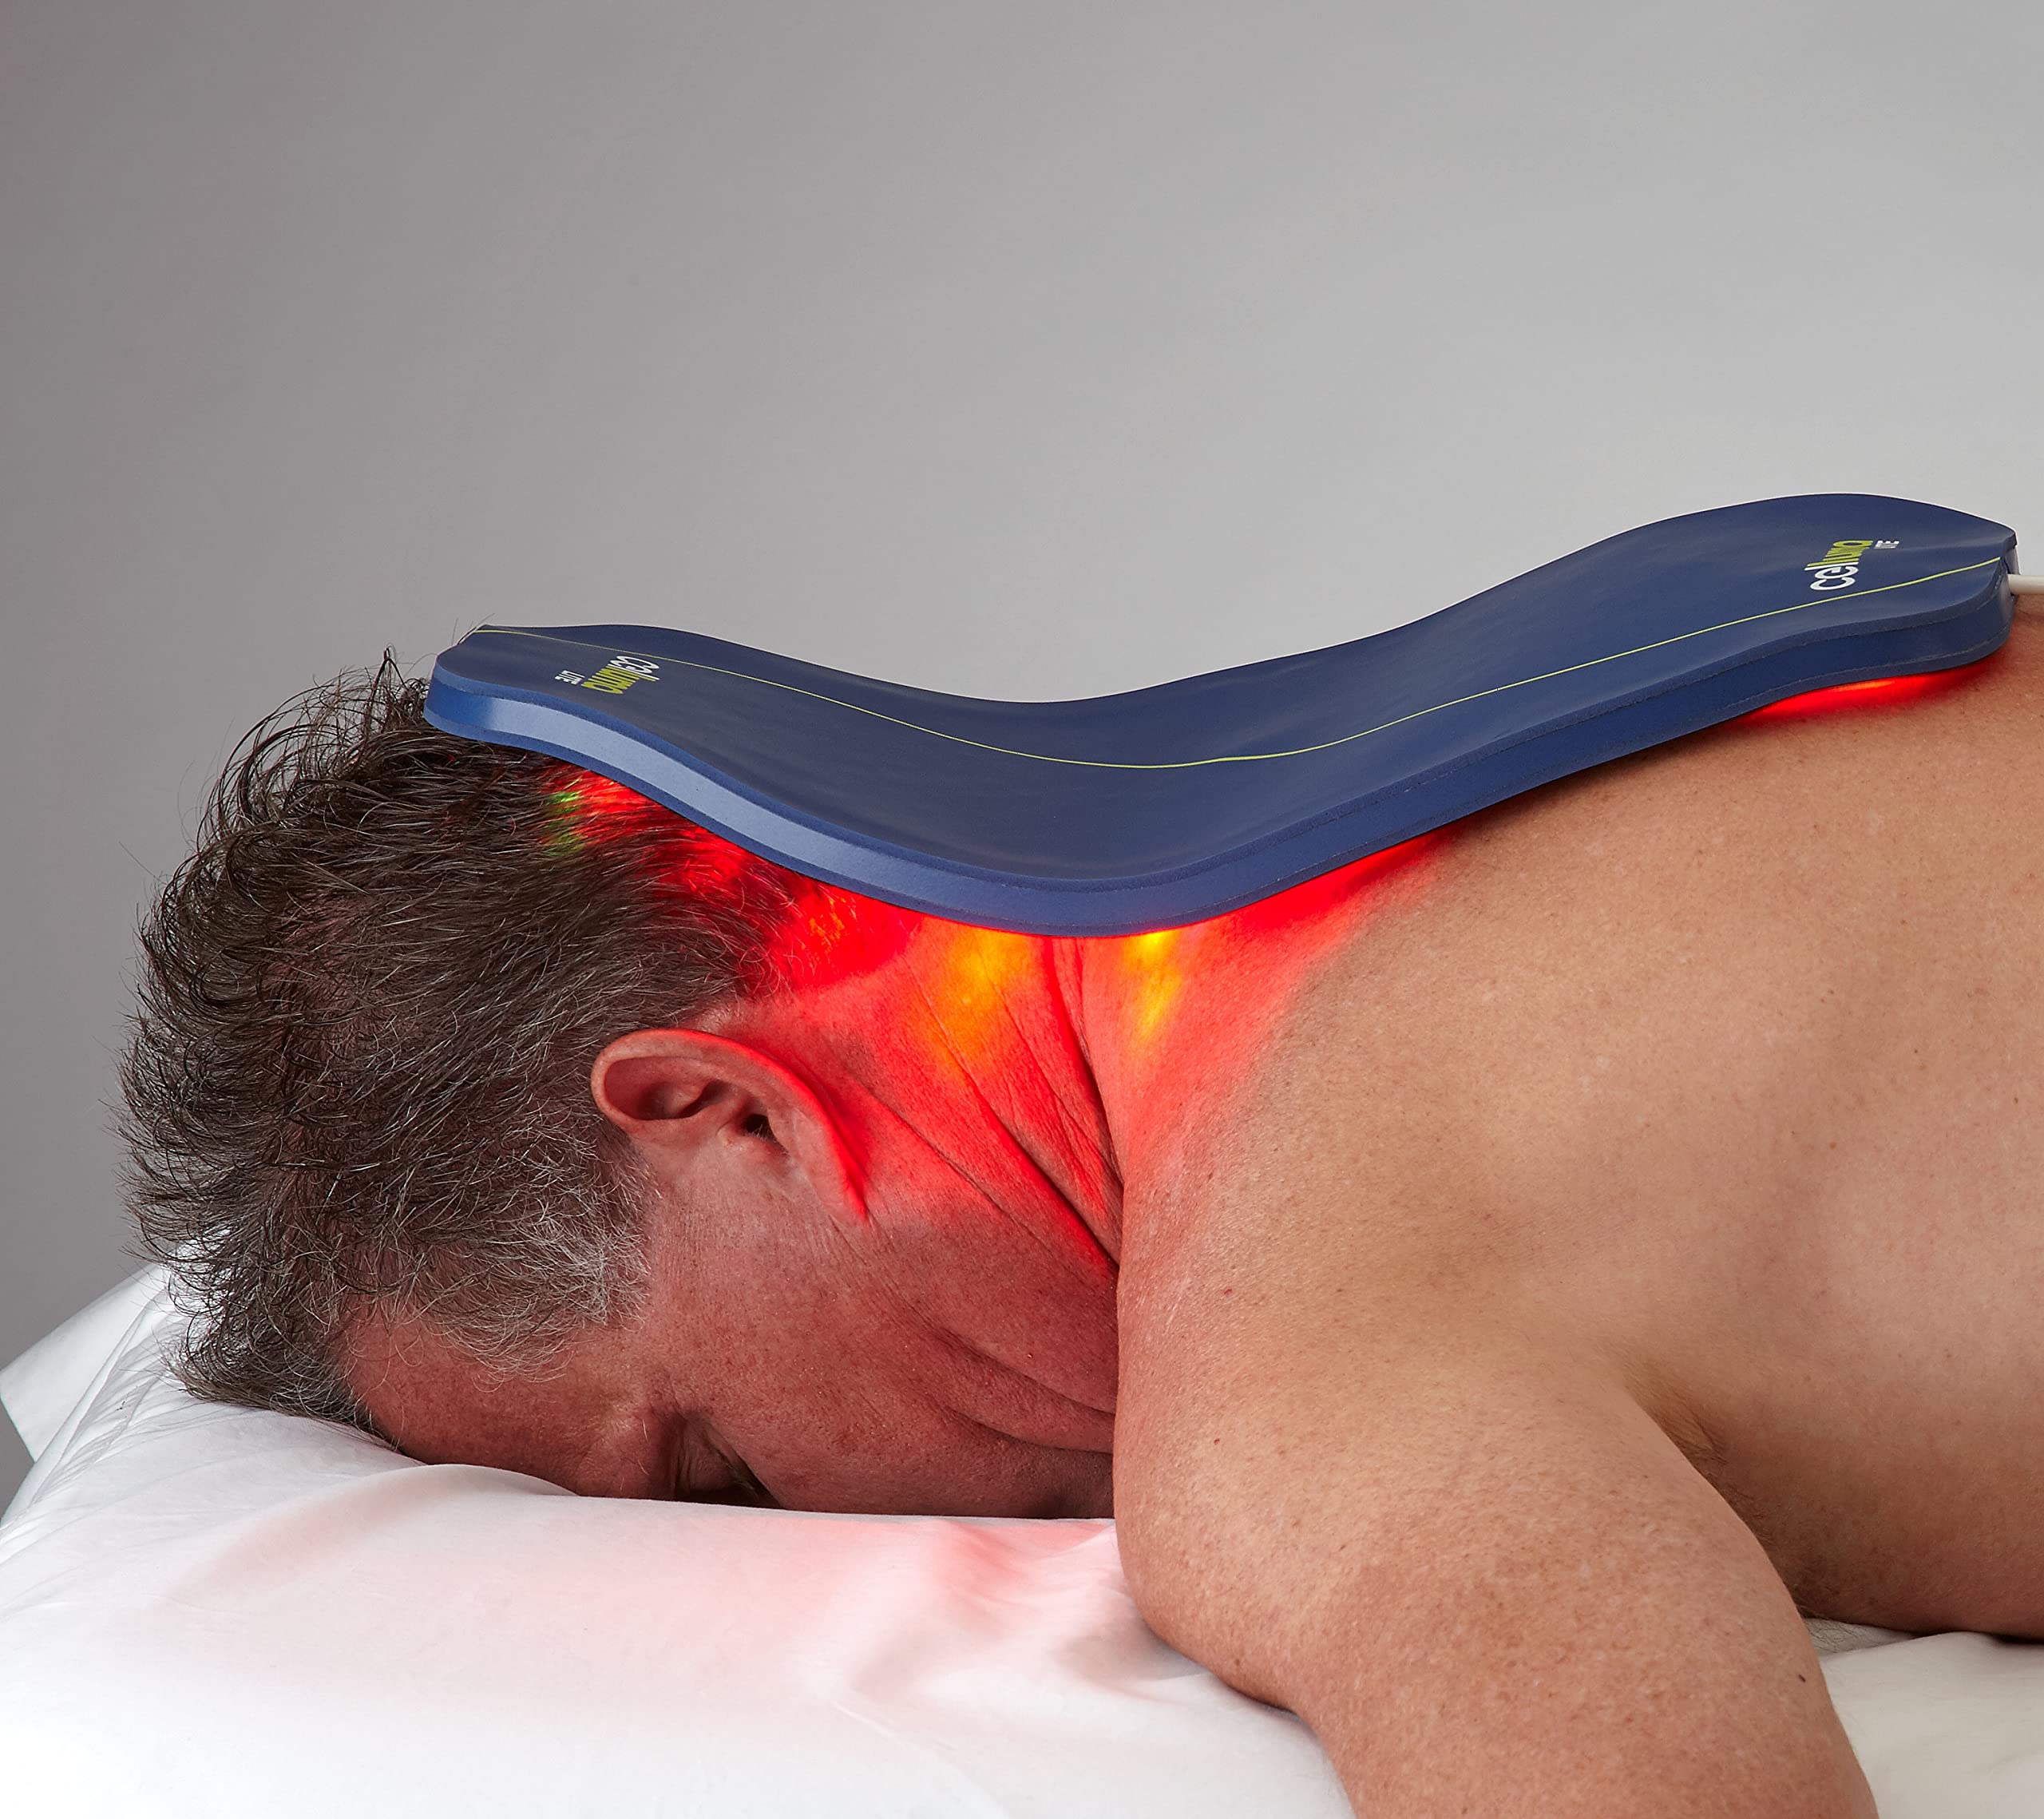 Celluma Home - 2Mode LED Therapy FDA Cleared for Anti-Aging and Muscle/Joint Pain